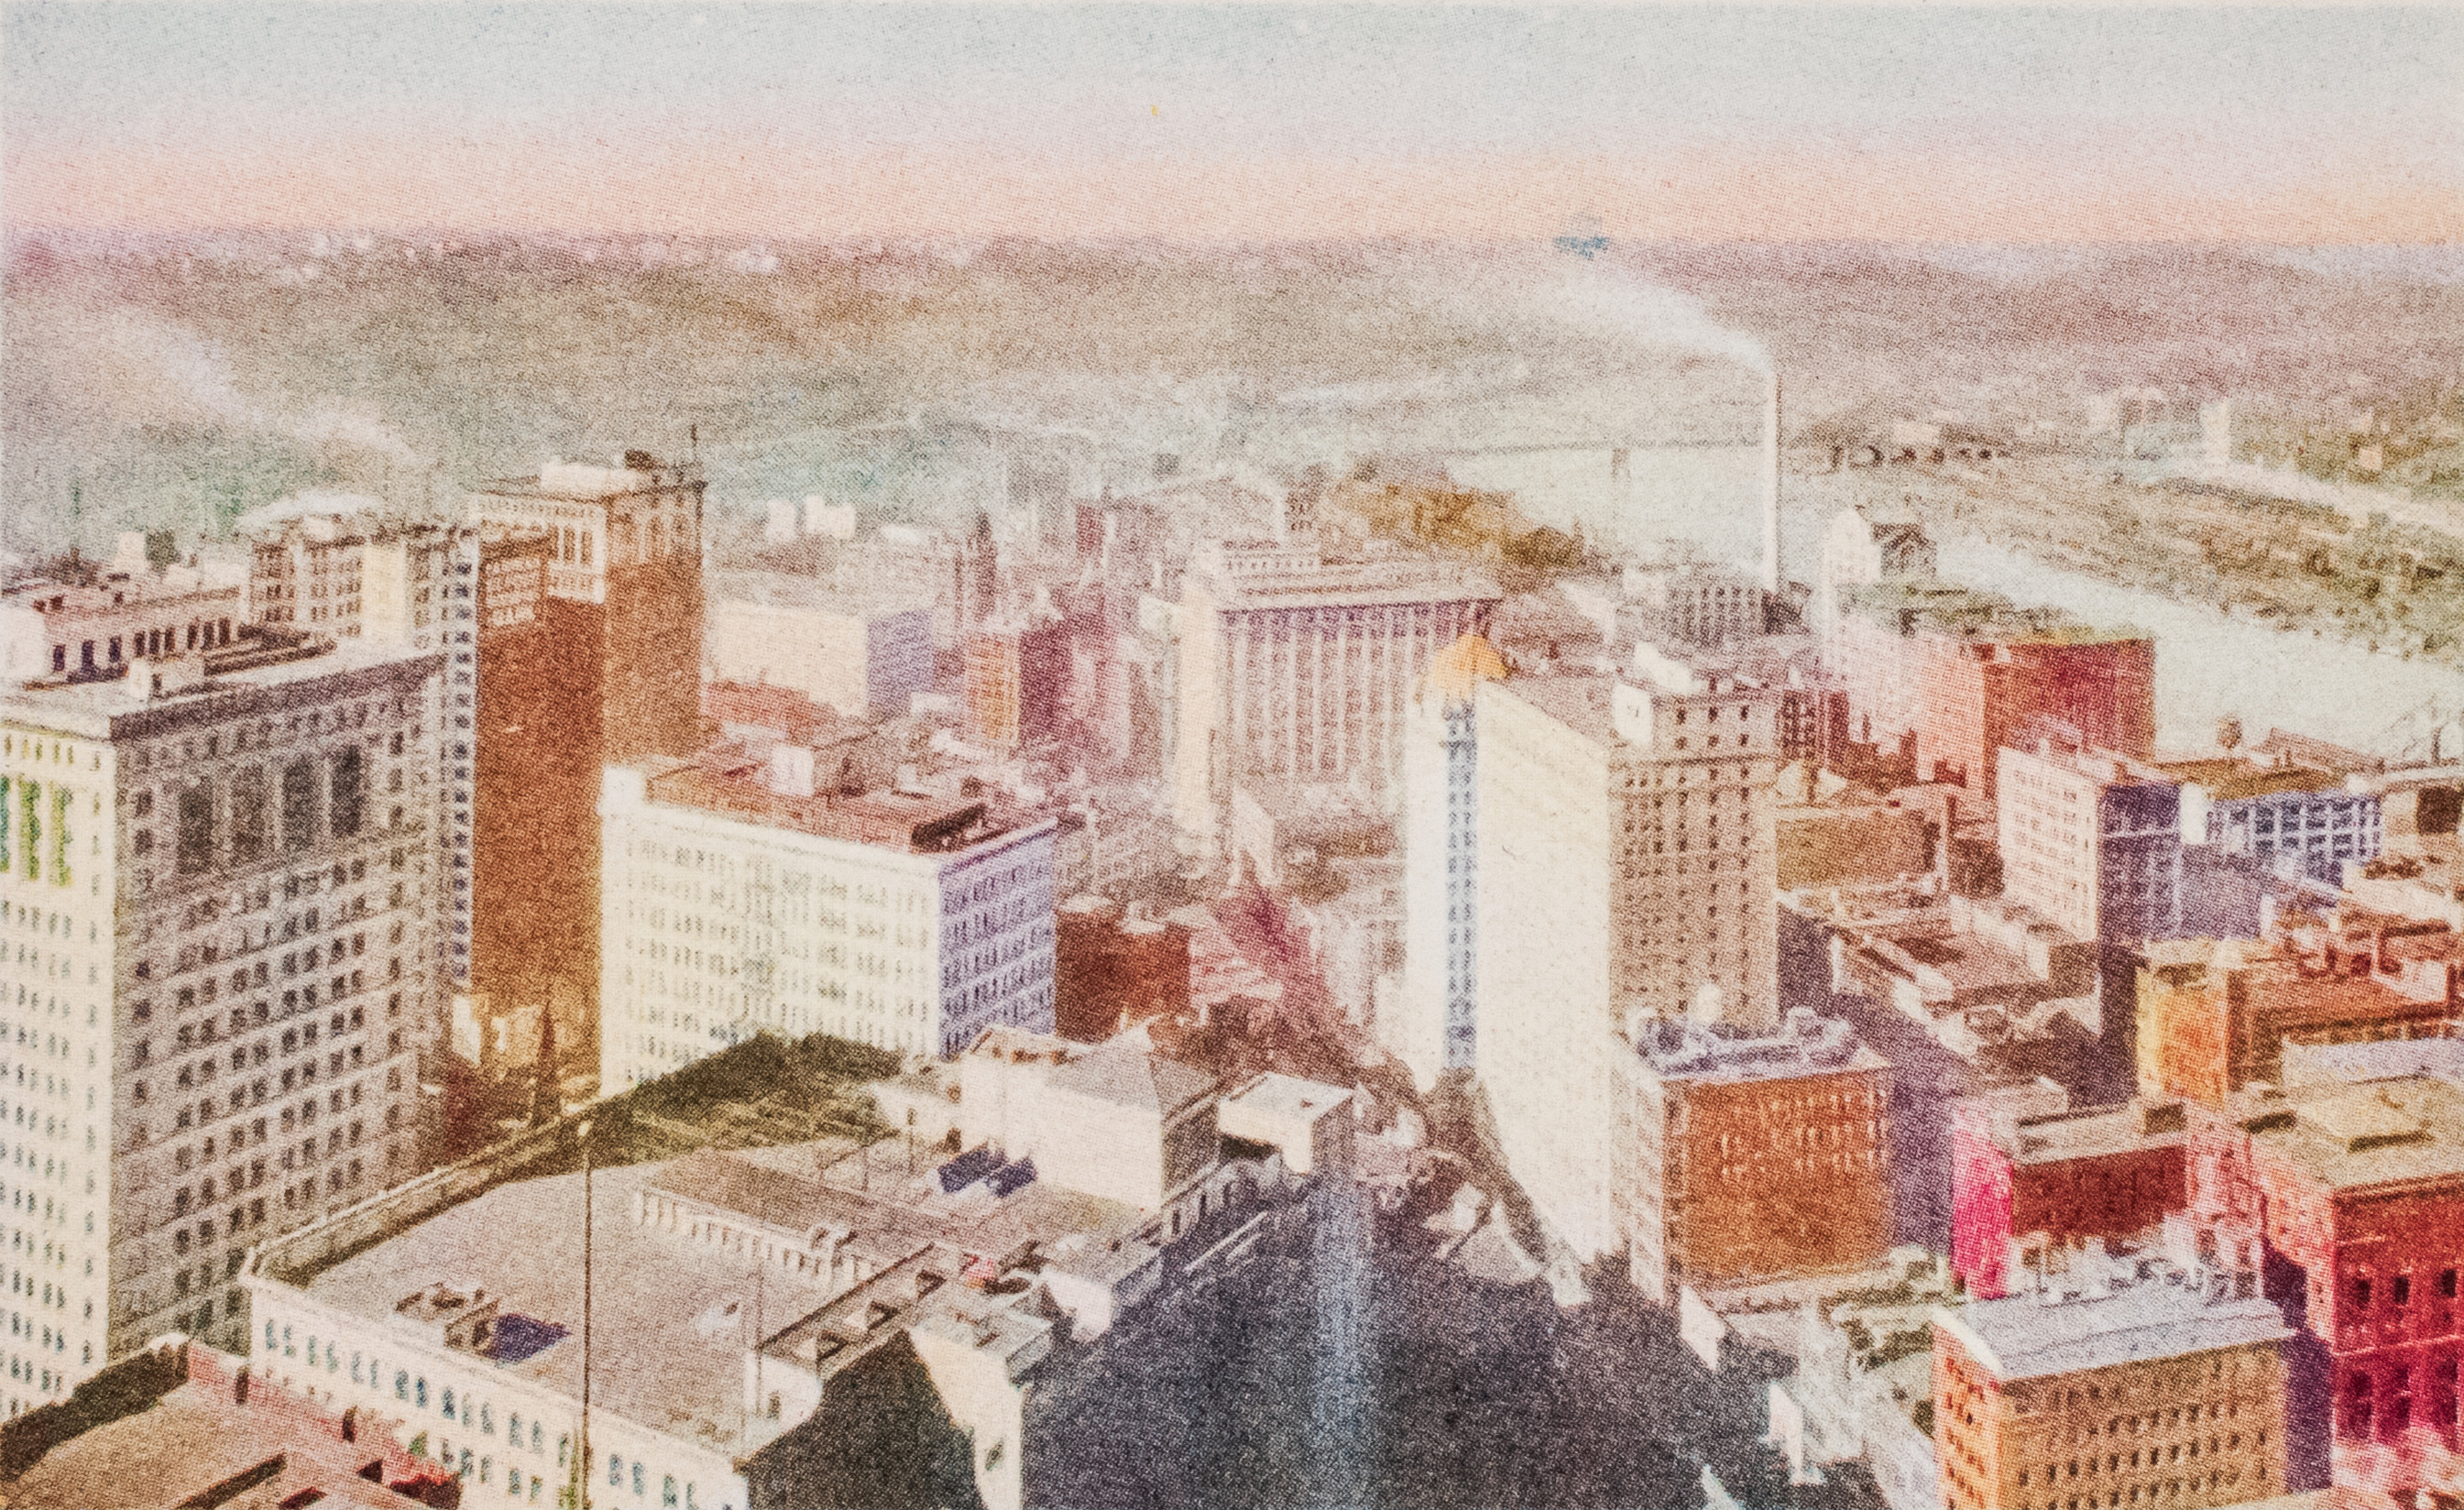 An old aerial photograph of pittsburgh - showing the city, and the river, sky,  and the surrounding wilderness